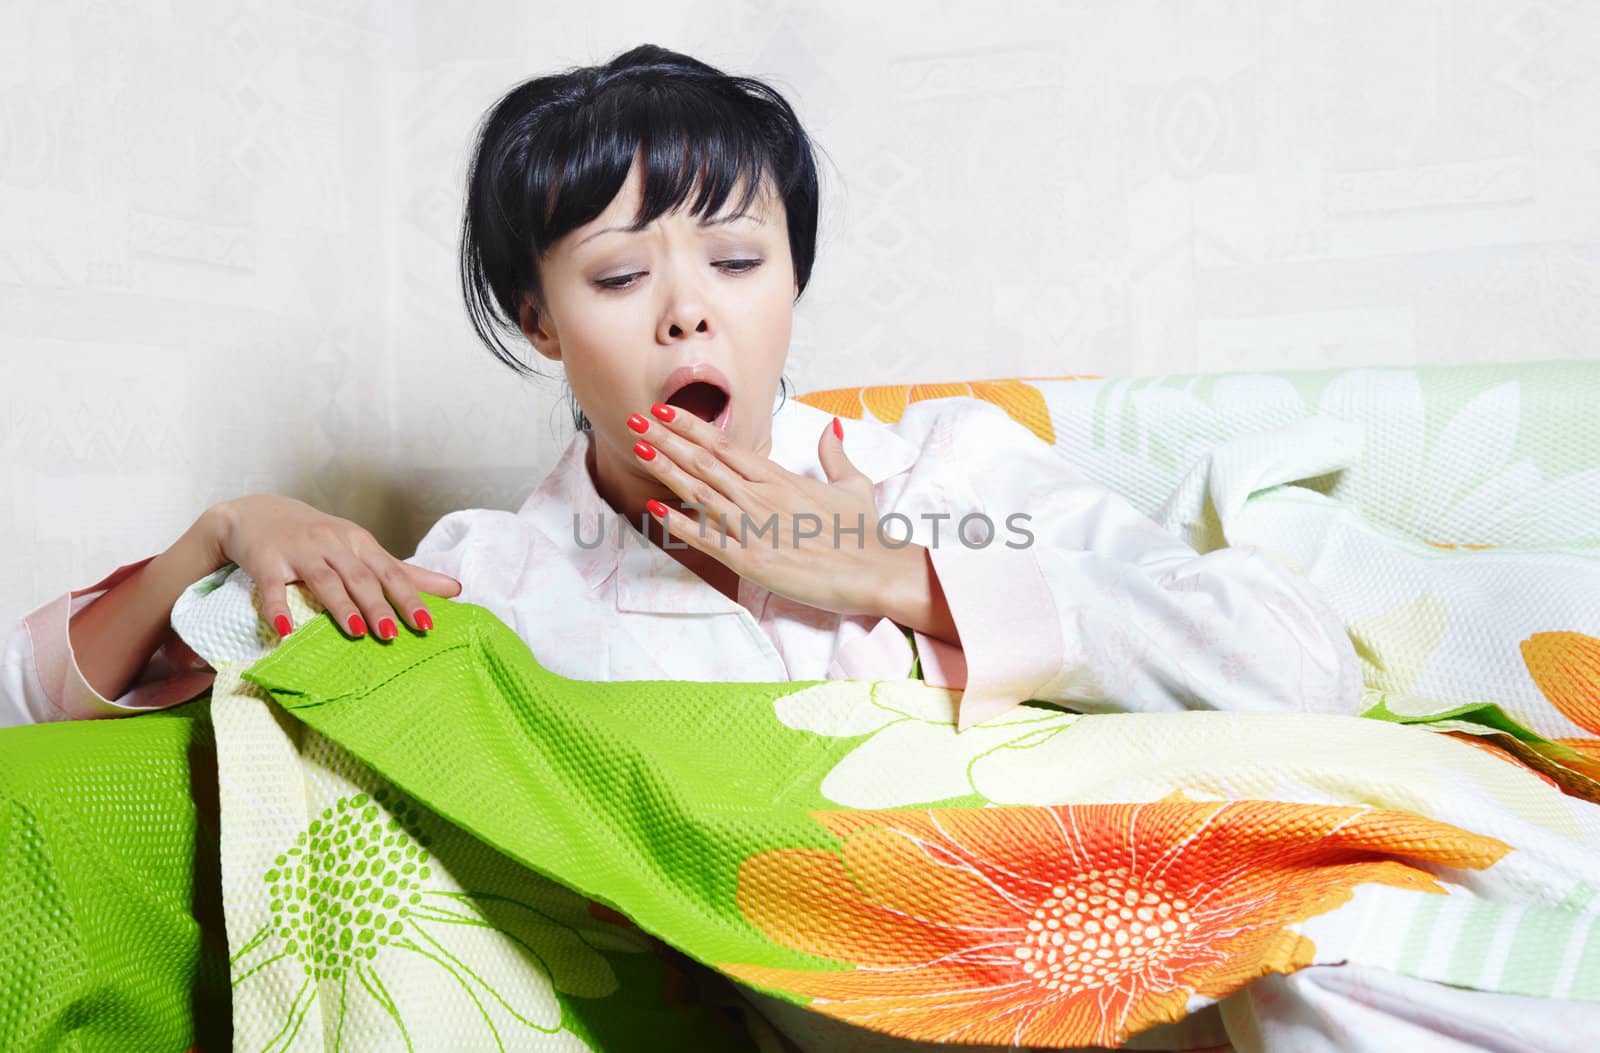 Yawning lady on the bed covered by colorful blanket